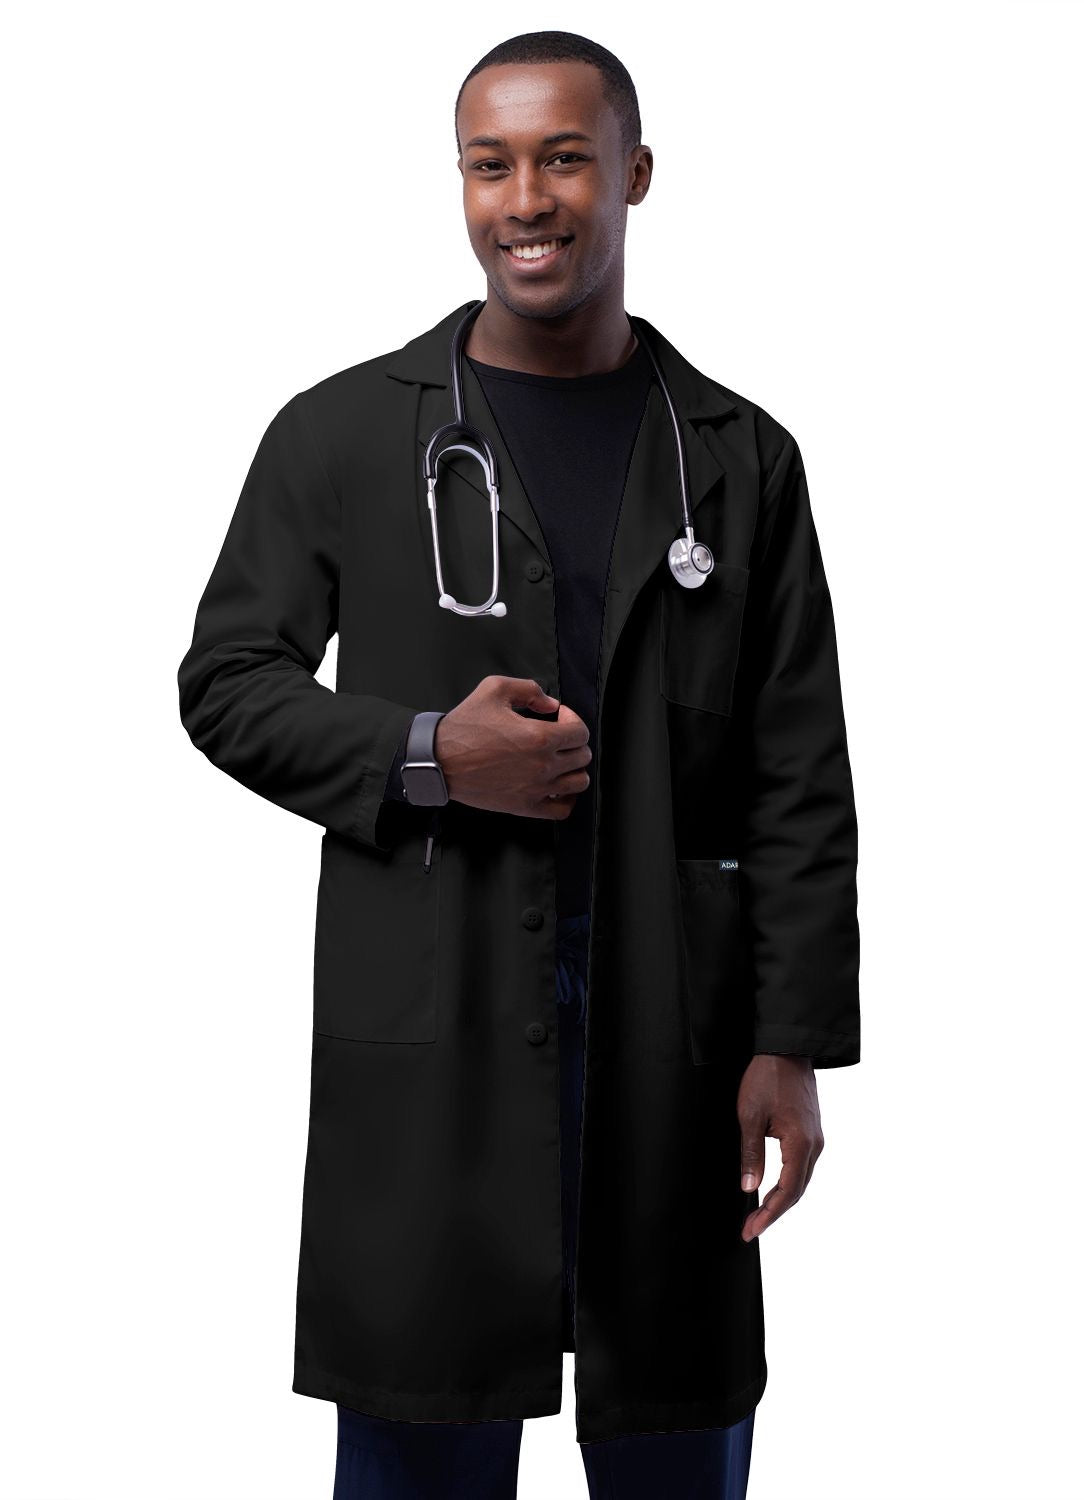 Unisex 39" Lab Coat With Inner Pockets by Adar Size 34 to 54 / Black